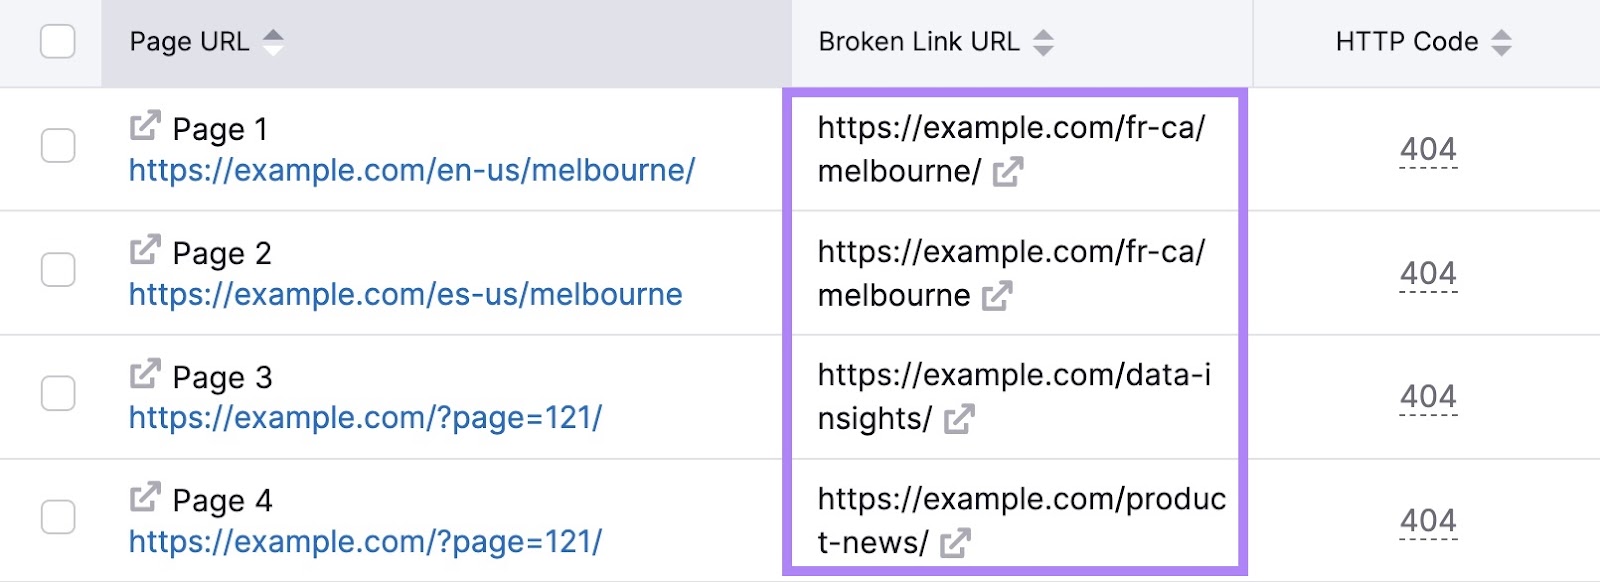 Site Audit results for breached  links and 404 errors.